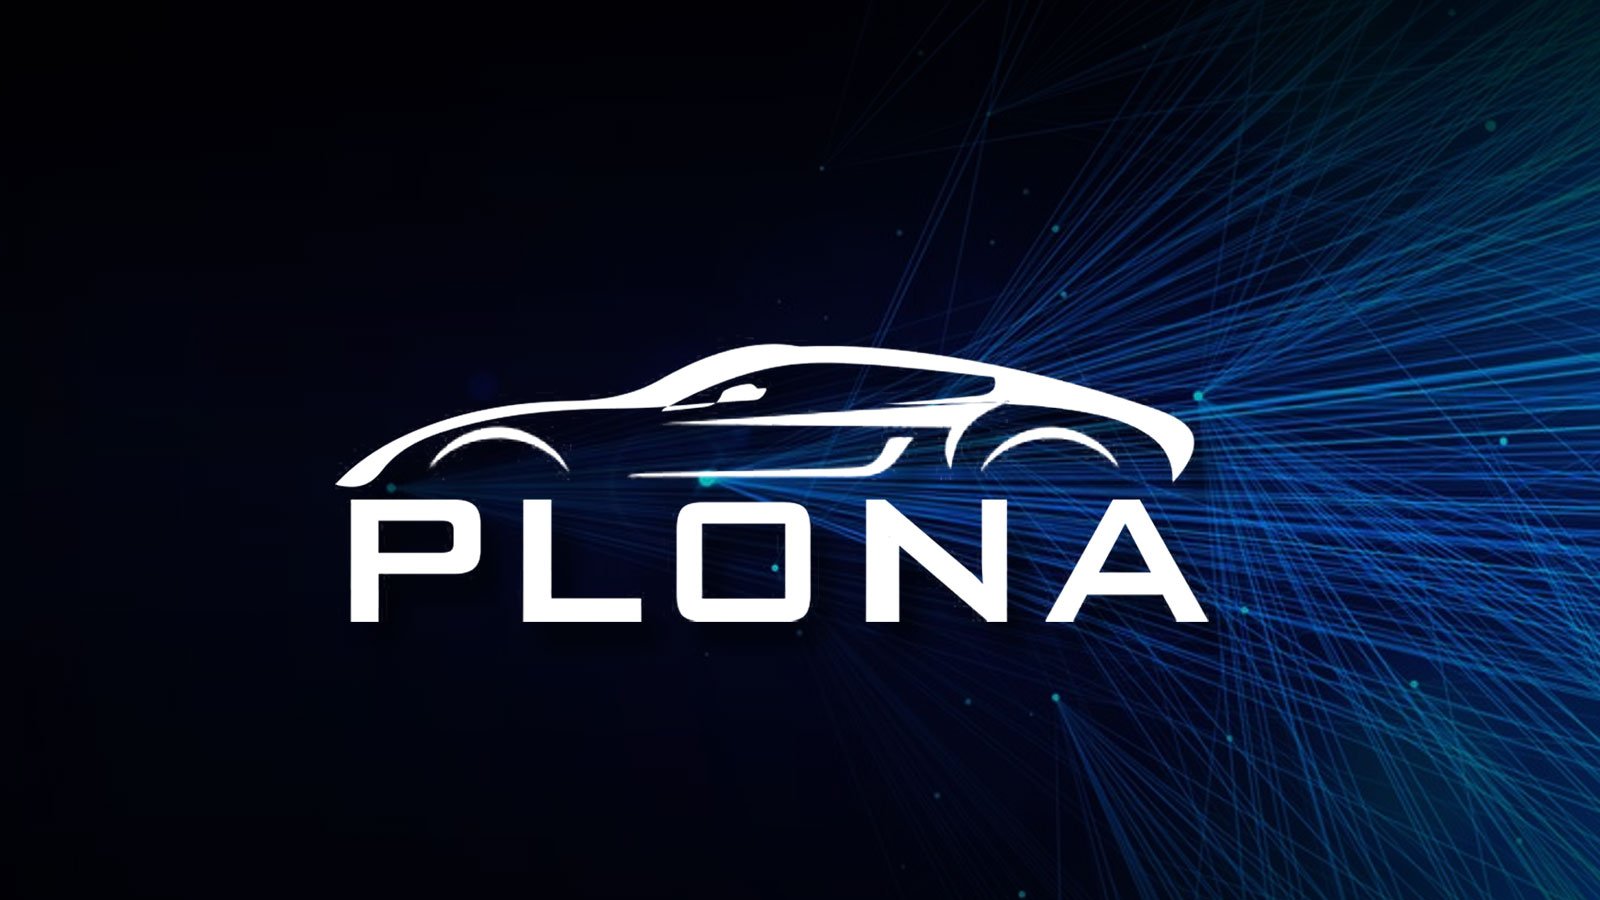 Plona (PLON) Pre-Sale Attempts to Introduce New Option for Terra Classic (LUNC) and Axie Infinity (AXS) Enthusiasts